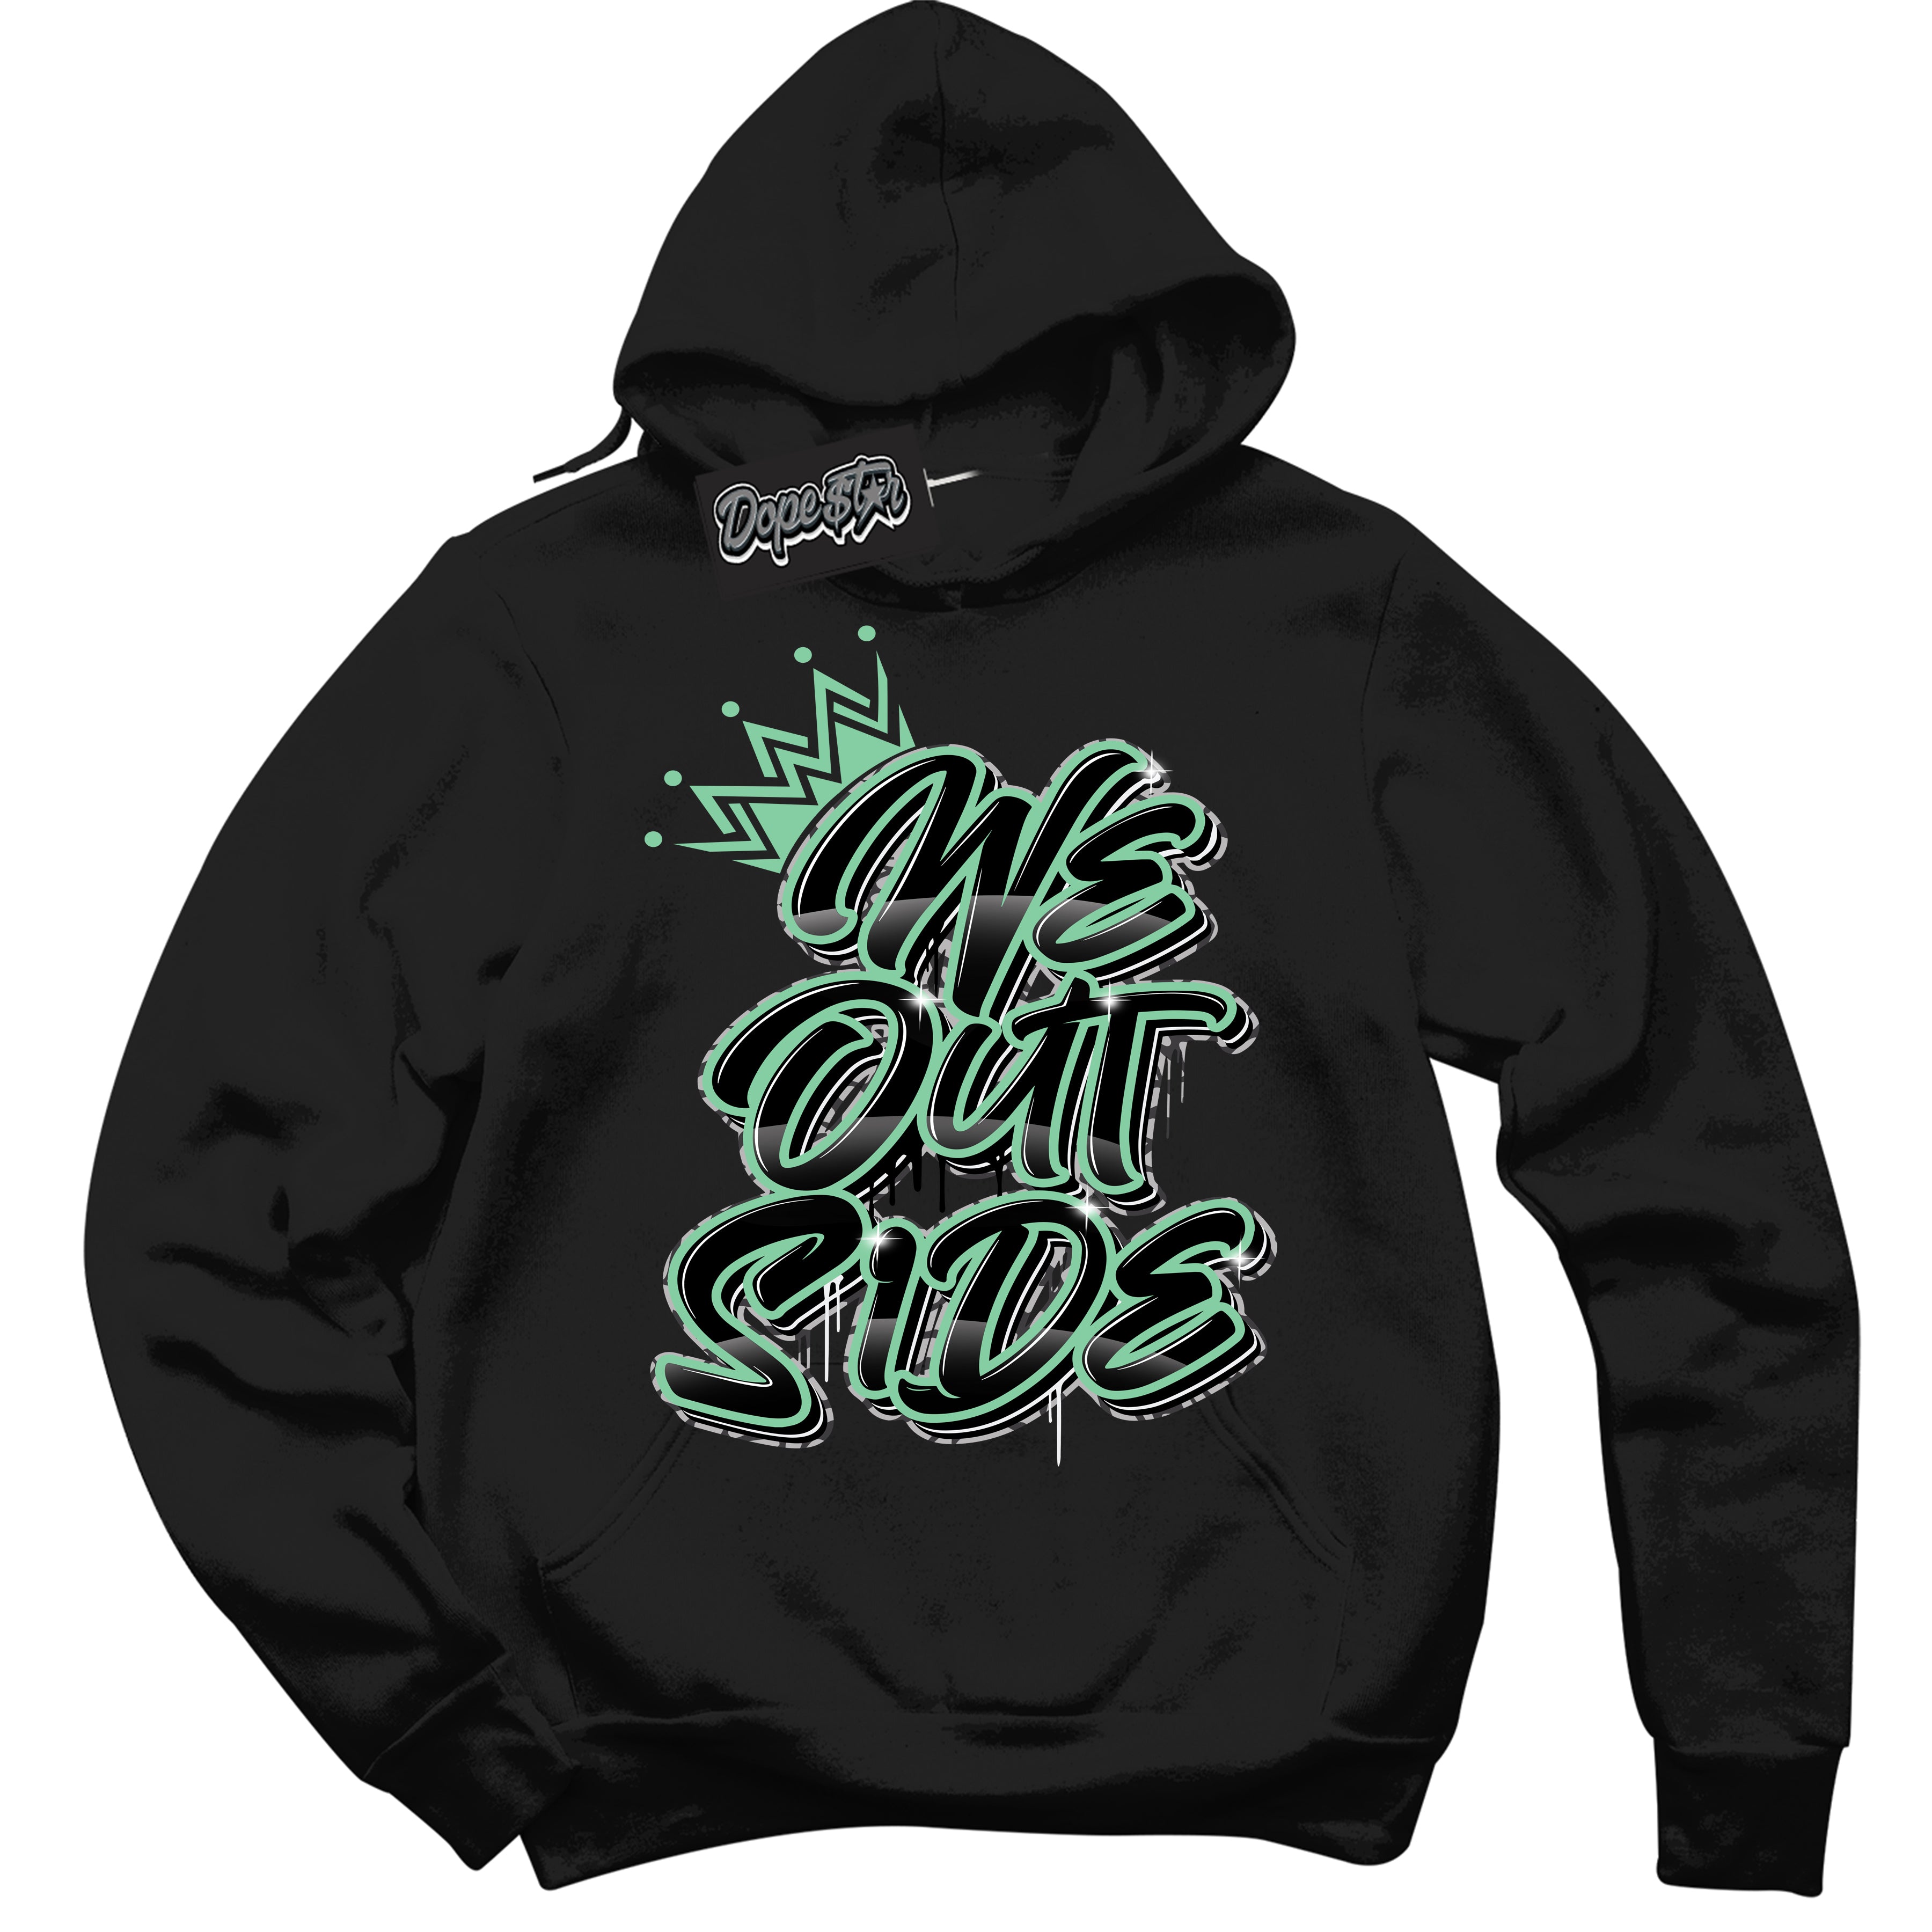 Cool Black Graphic DopeStar Hoodie with “ We Outside “ print, that perfectly matches Green Glow 3S sneakers